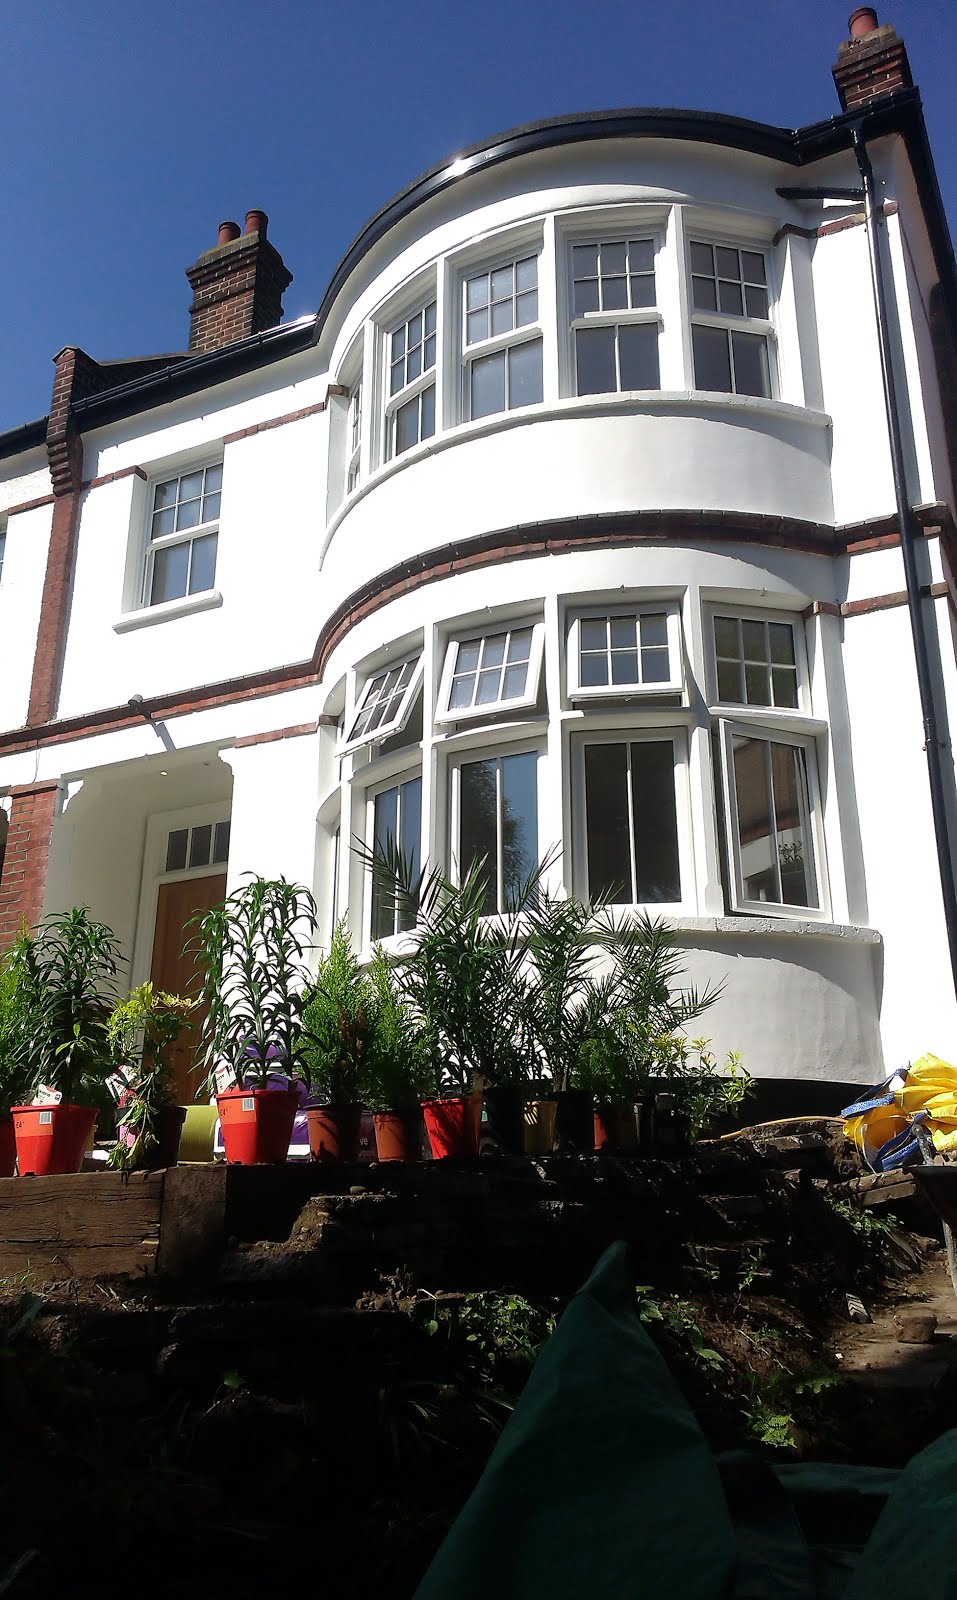 Eltham: Residents of Spencer Gardens Get New life for their home